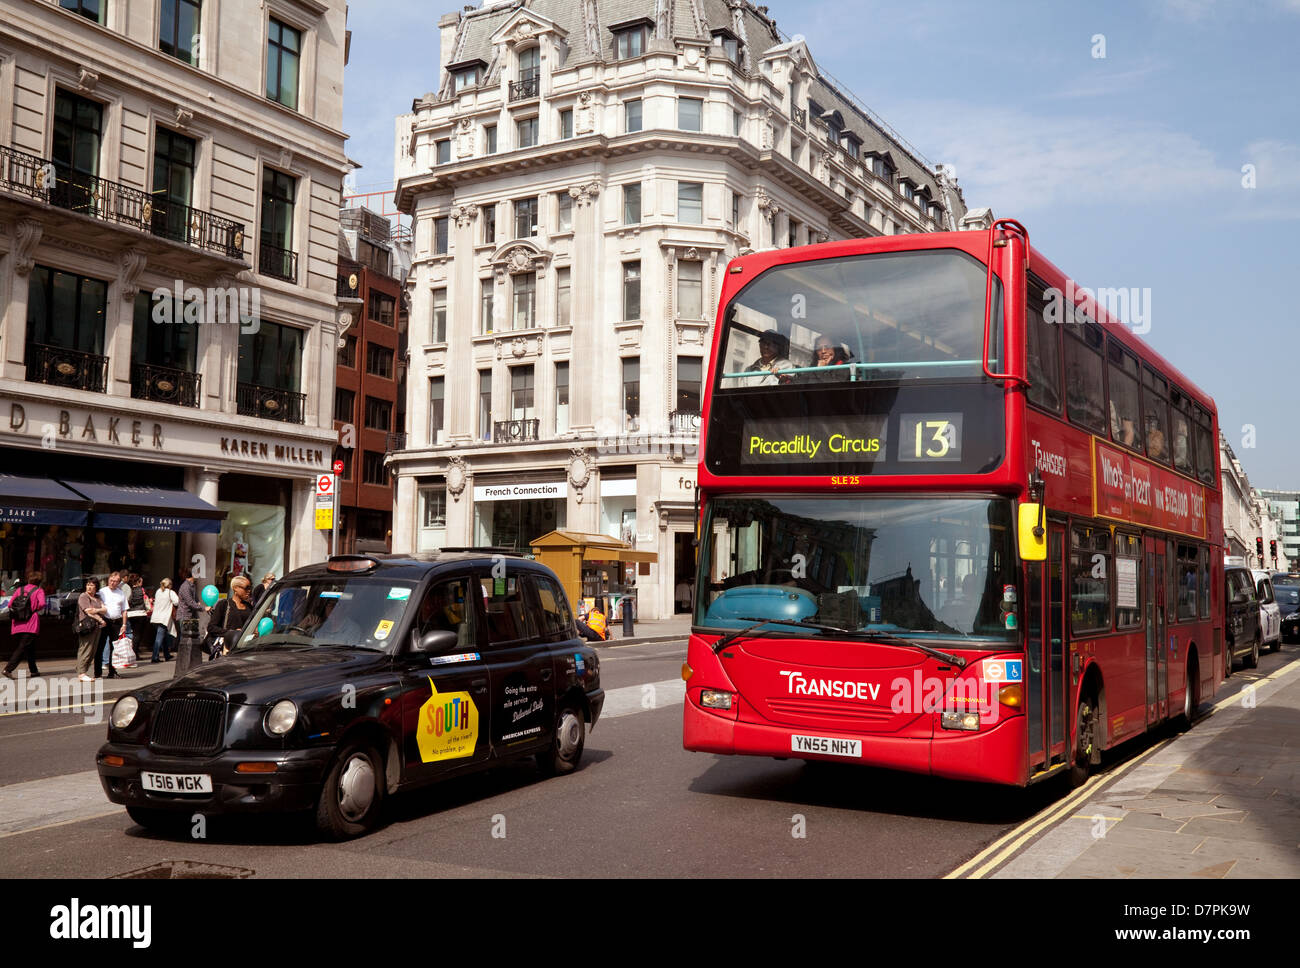 London bus and taxi, Regent Street scene, central London, UK England Stock Photo